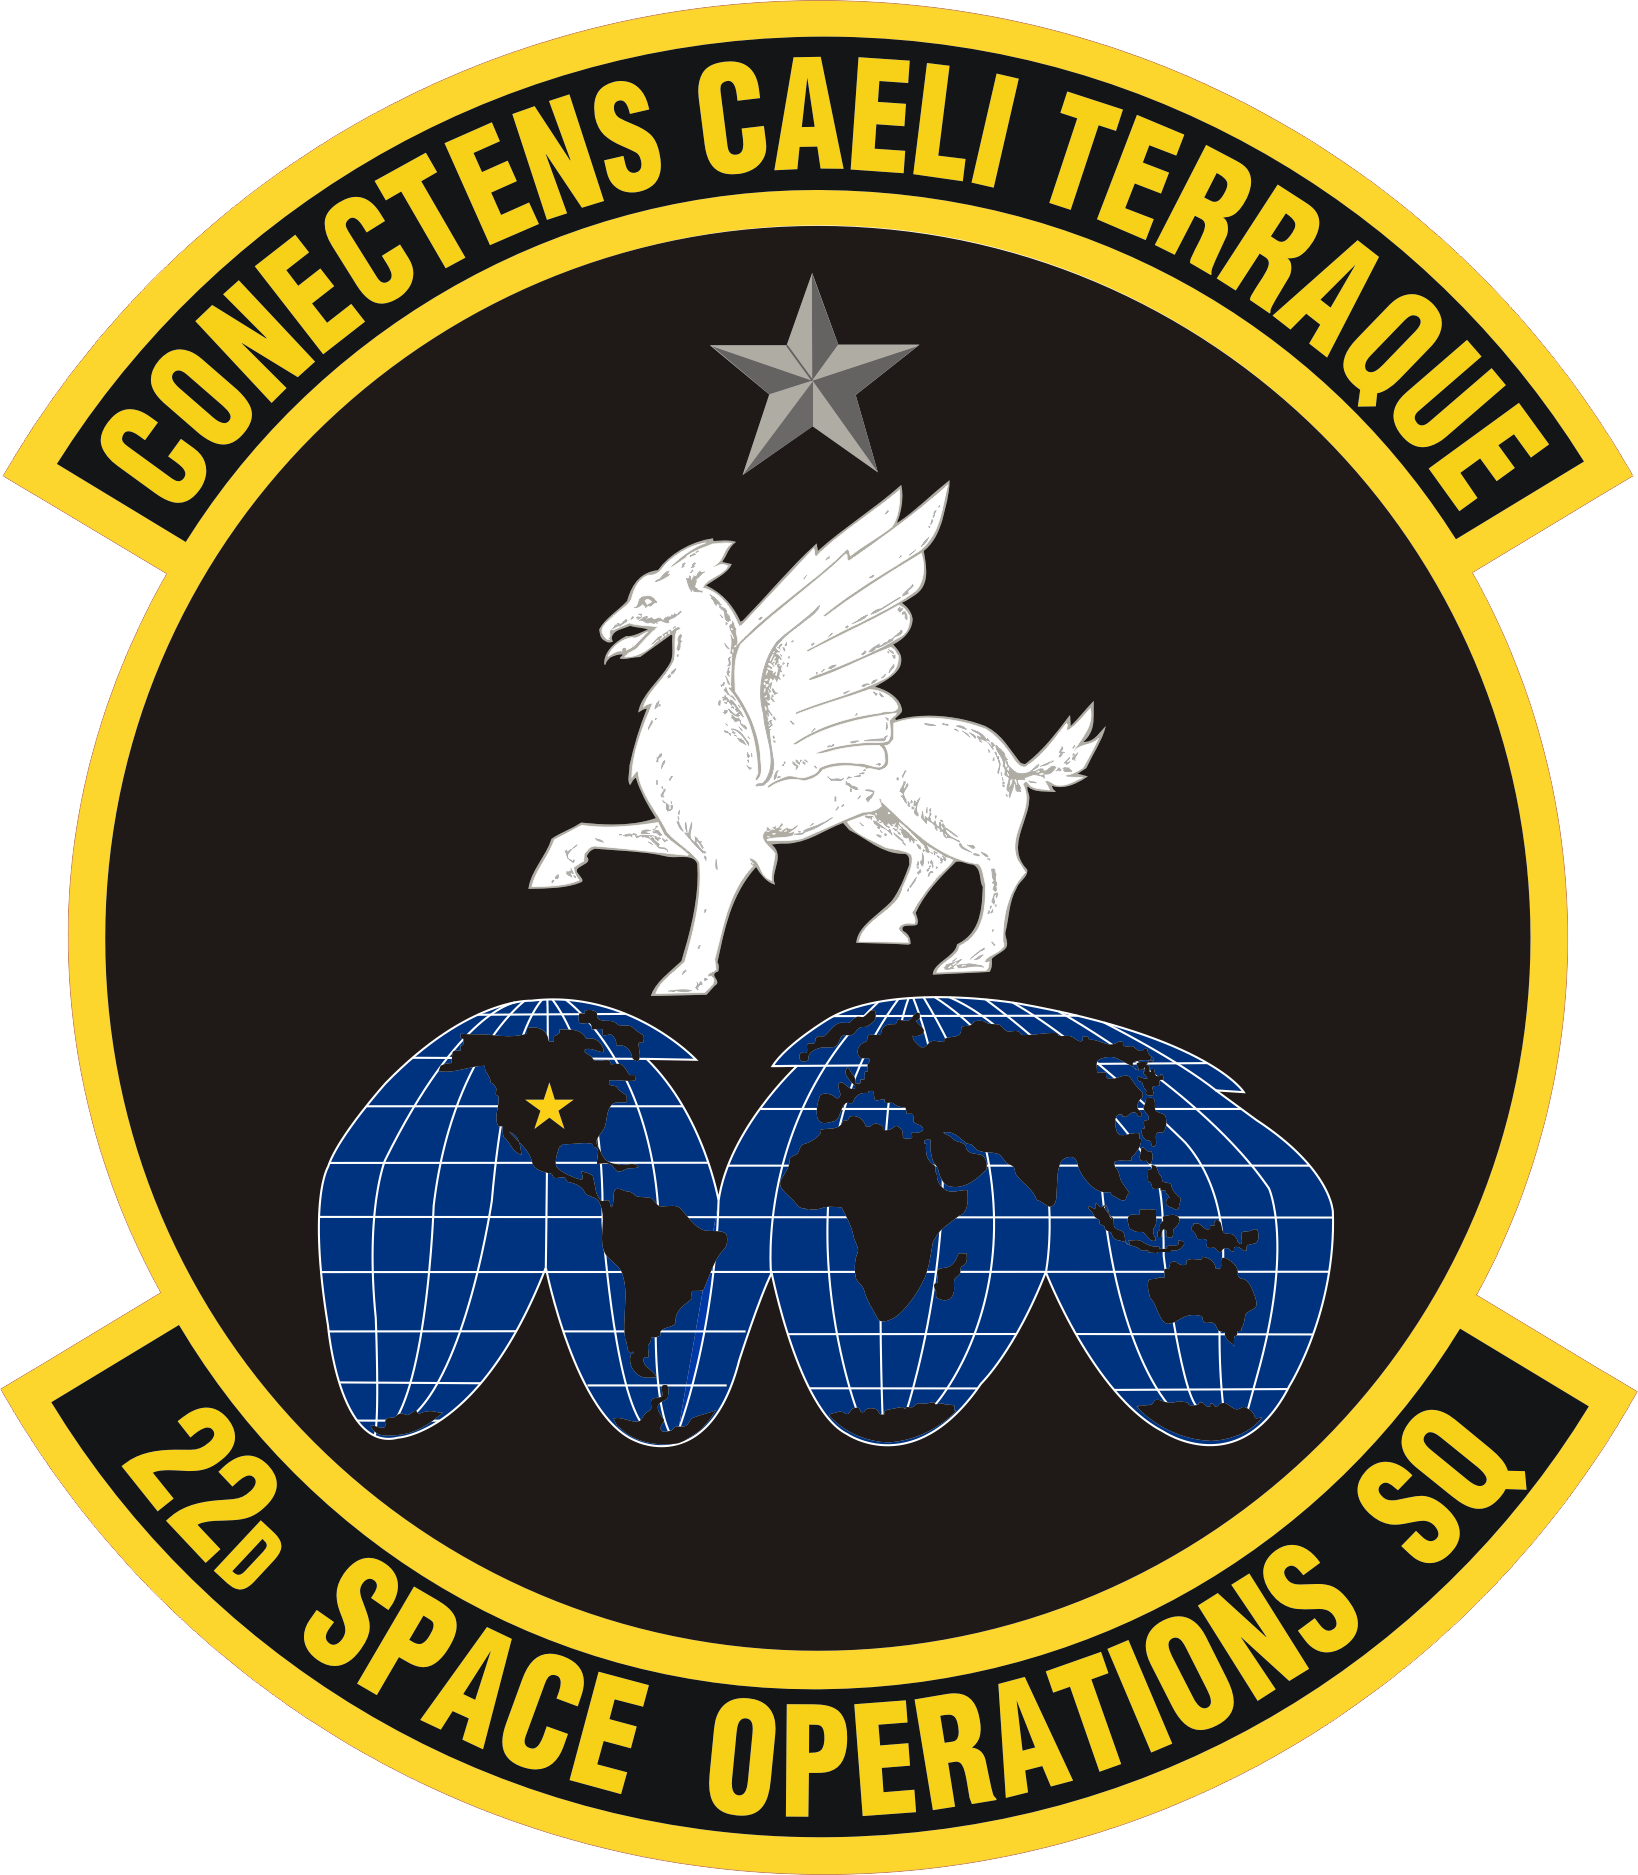 22nd Space Operations Squadron > Schriever Air Force Base > Display